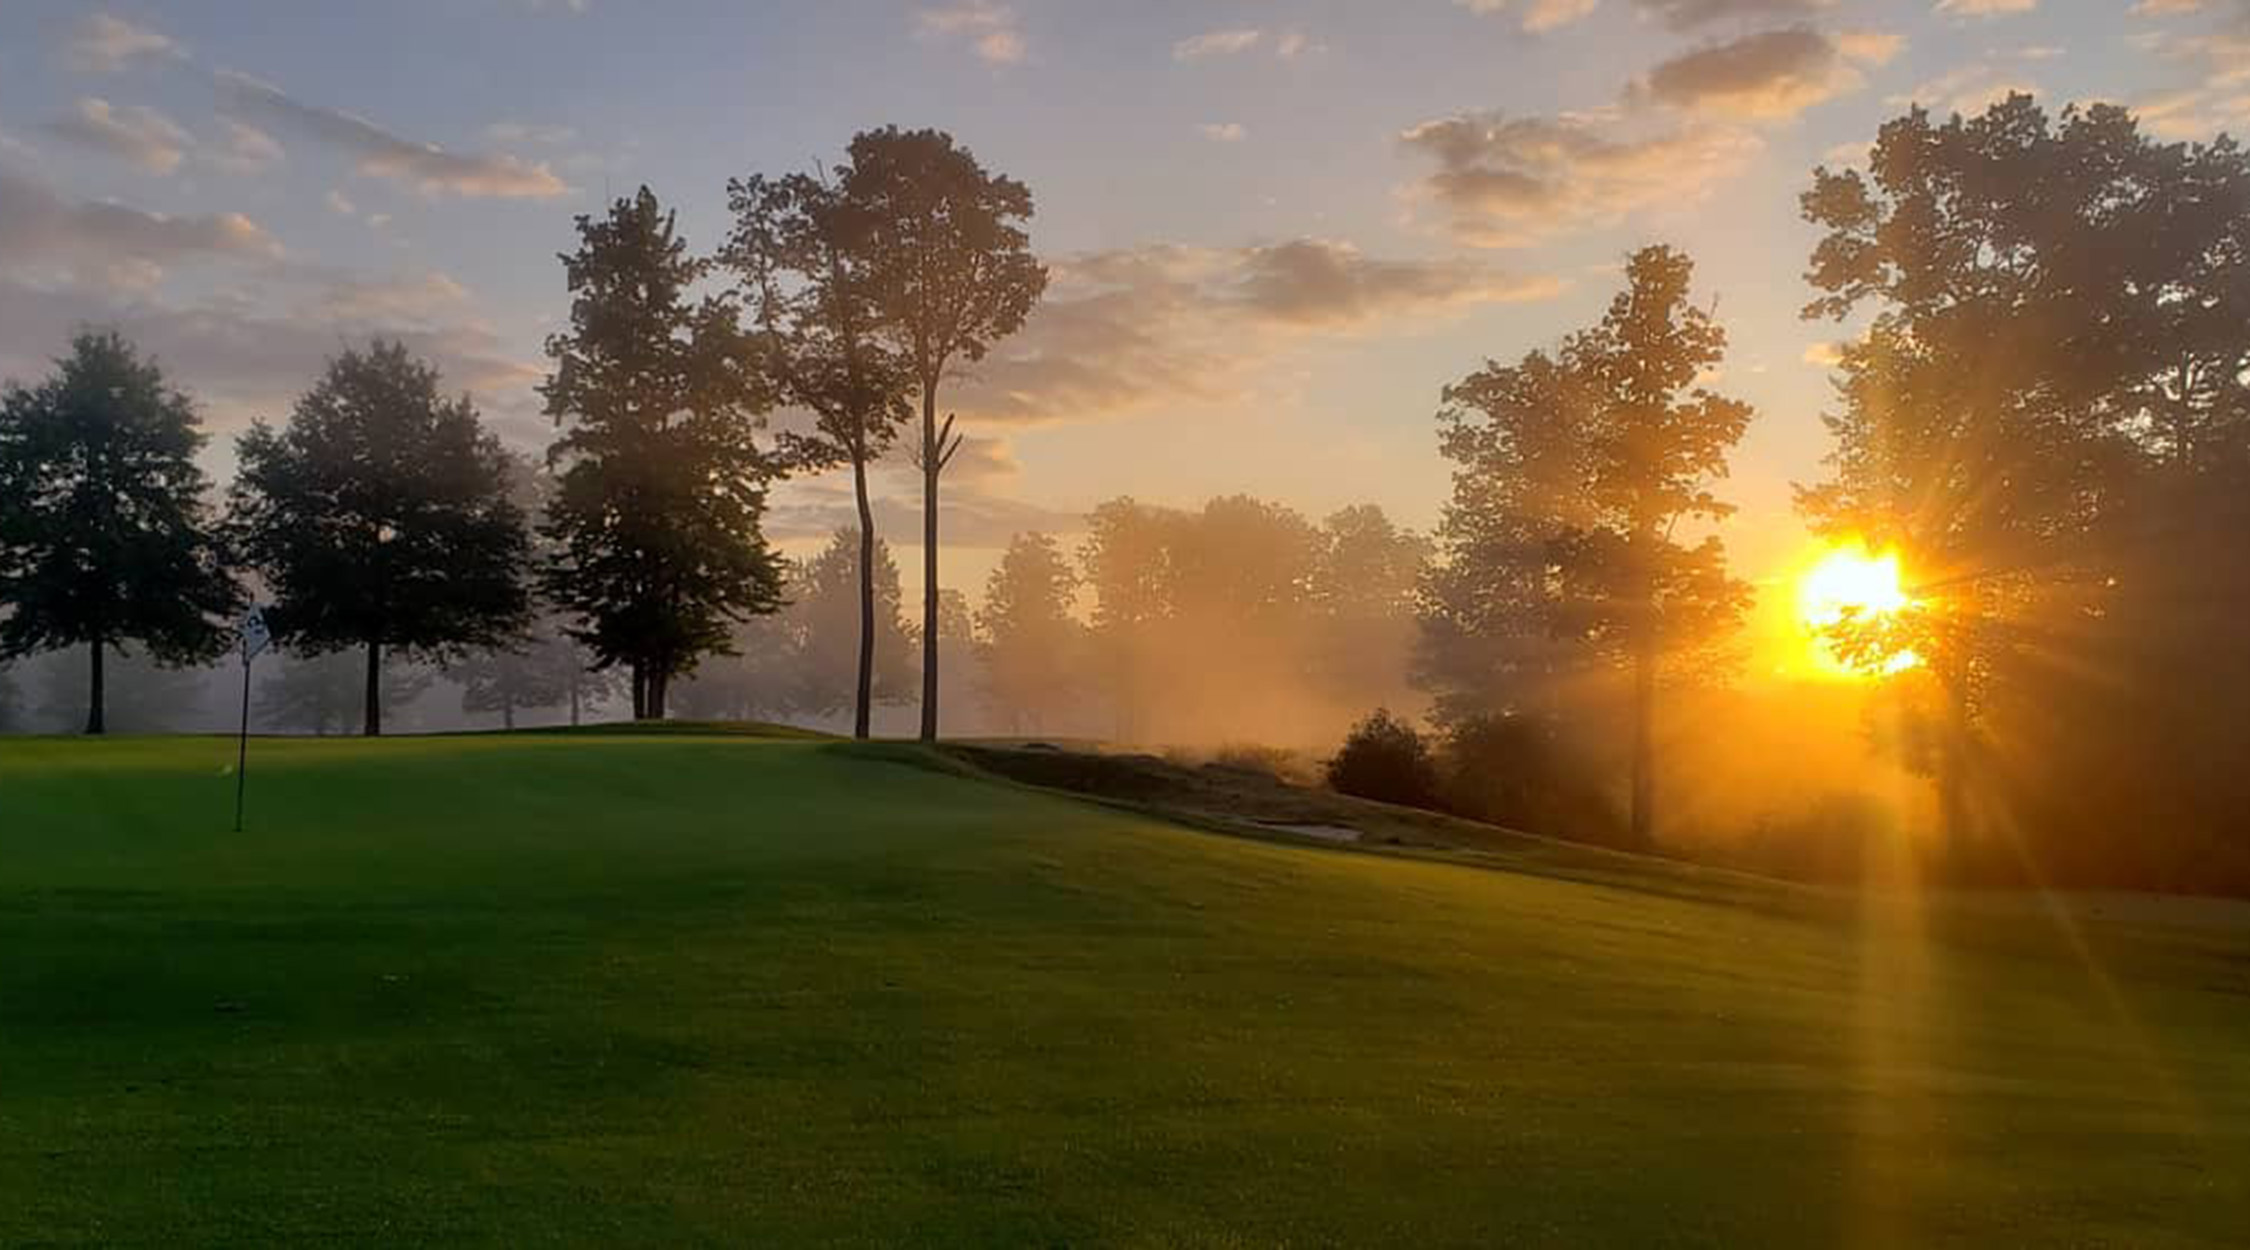 Golf at Nemacolin - Sunrise on the Course